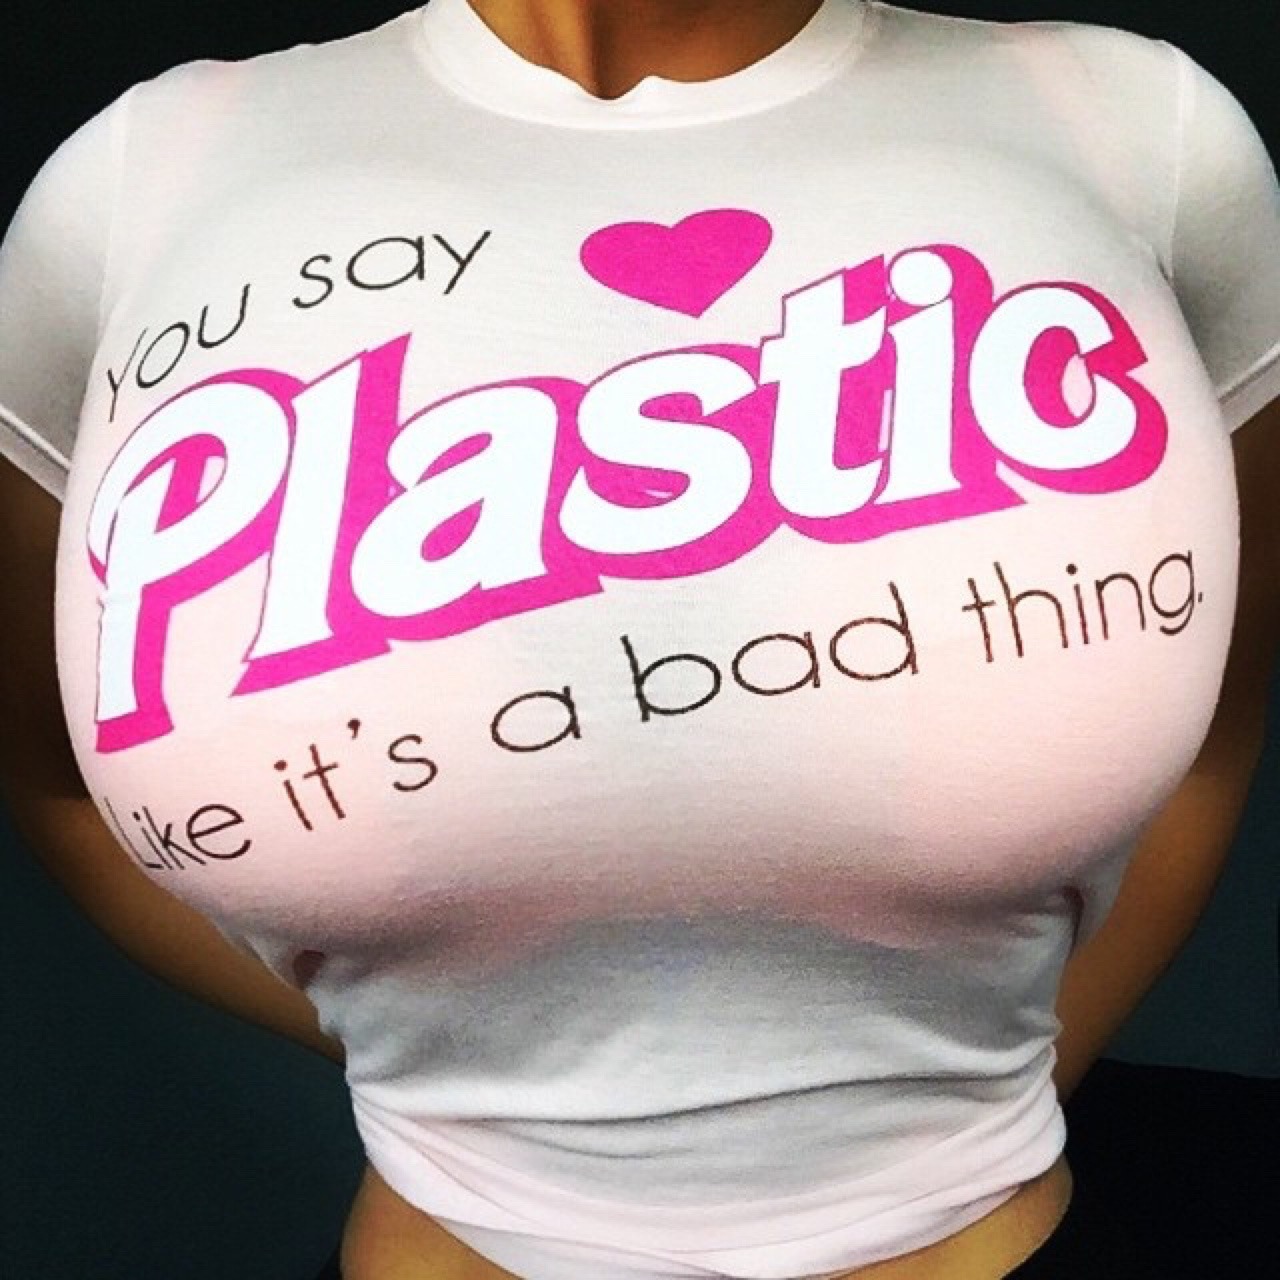 krystelkayo:  I’m hunting to find one of these to buy asap!  Being plastic isn’t